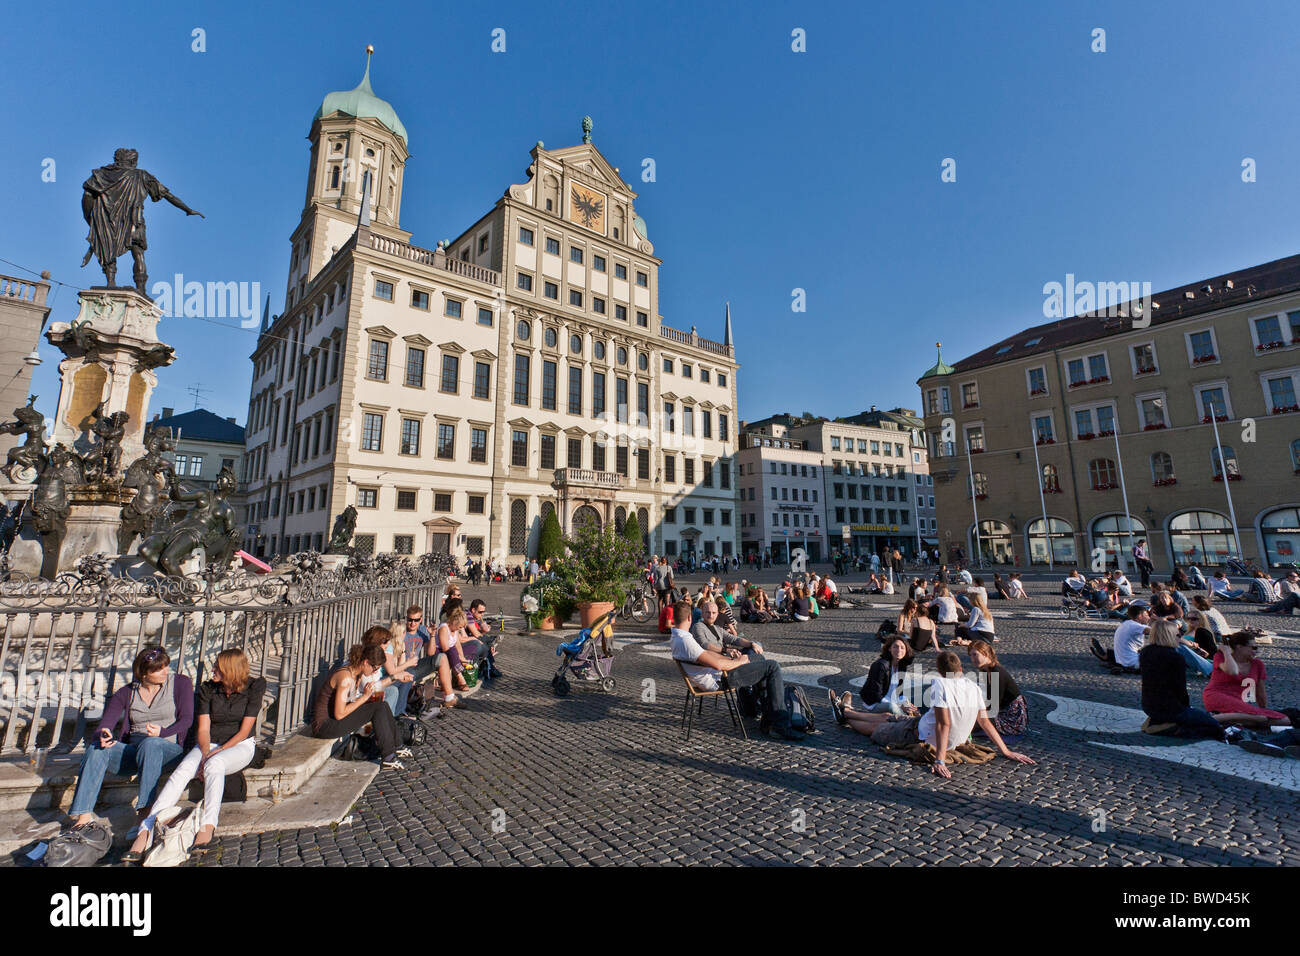 PEOPLE, AUGUSTUS FOUNTAIN, TOWN HALL PLACE, TOWN HALL, AUGSBURG, BAVARIA, GERMANY Stock Photo